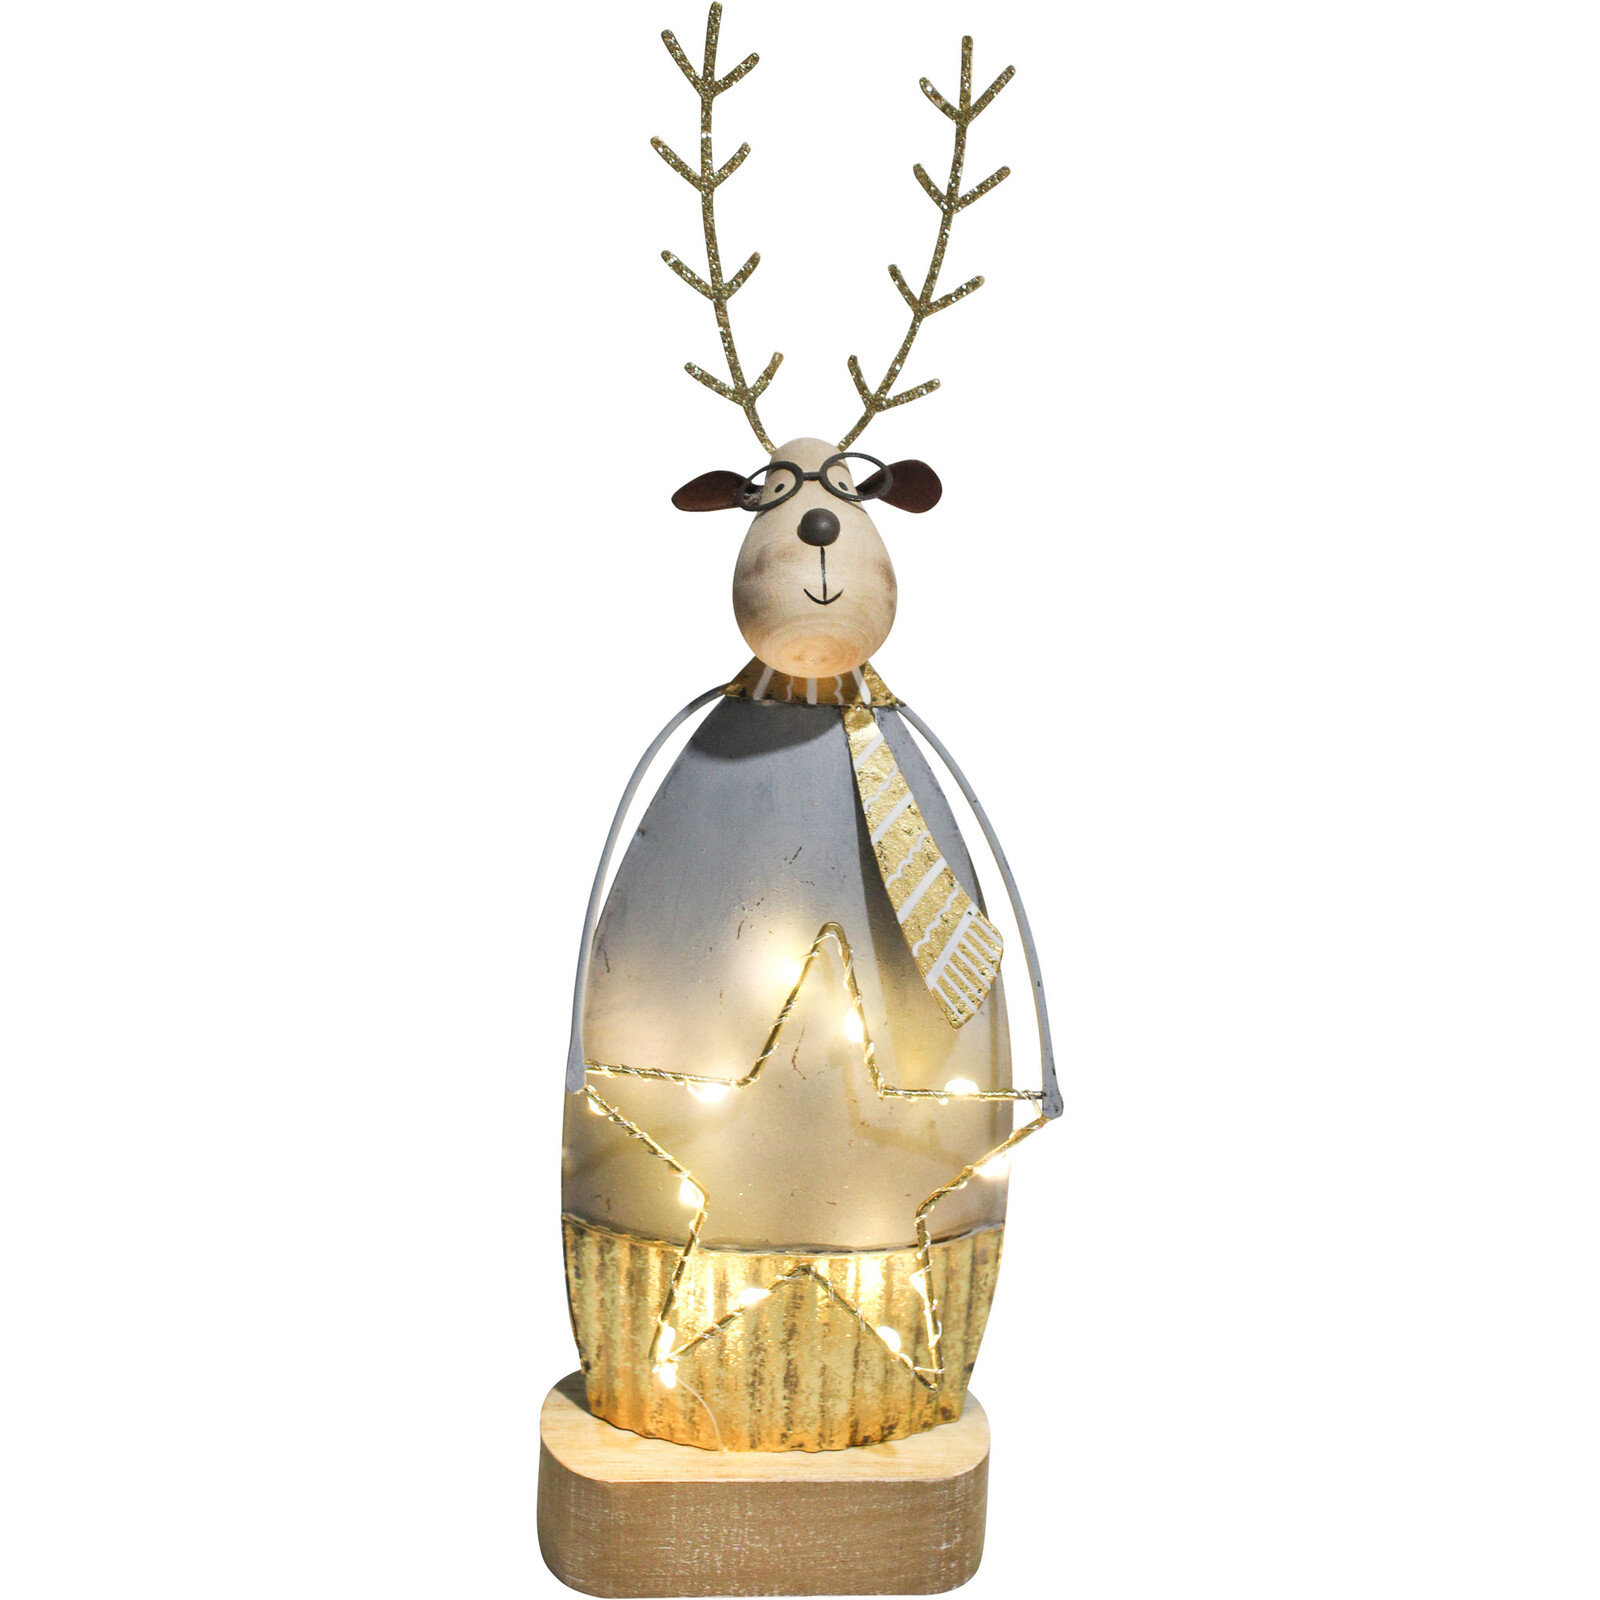 Rustic Reindeer with Star Light